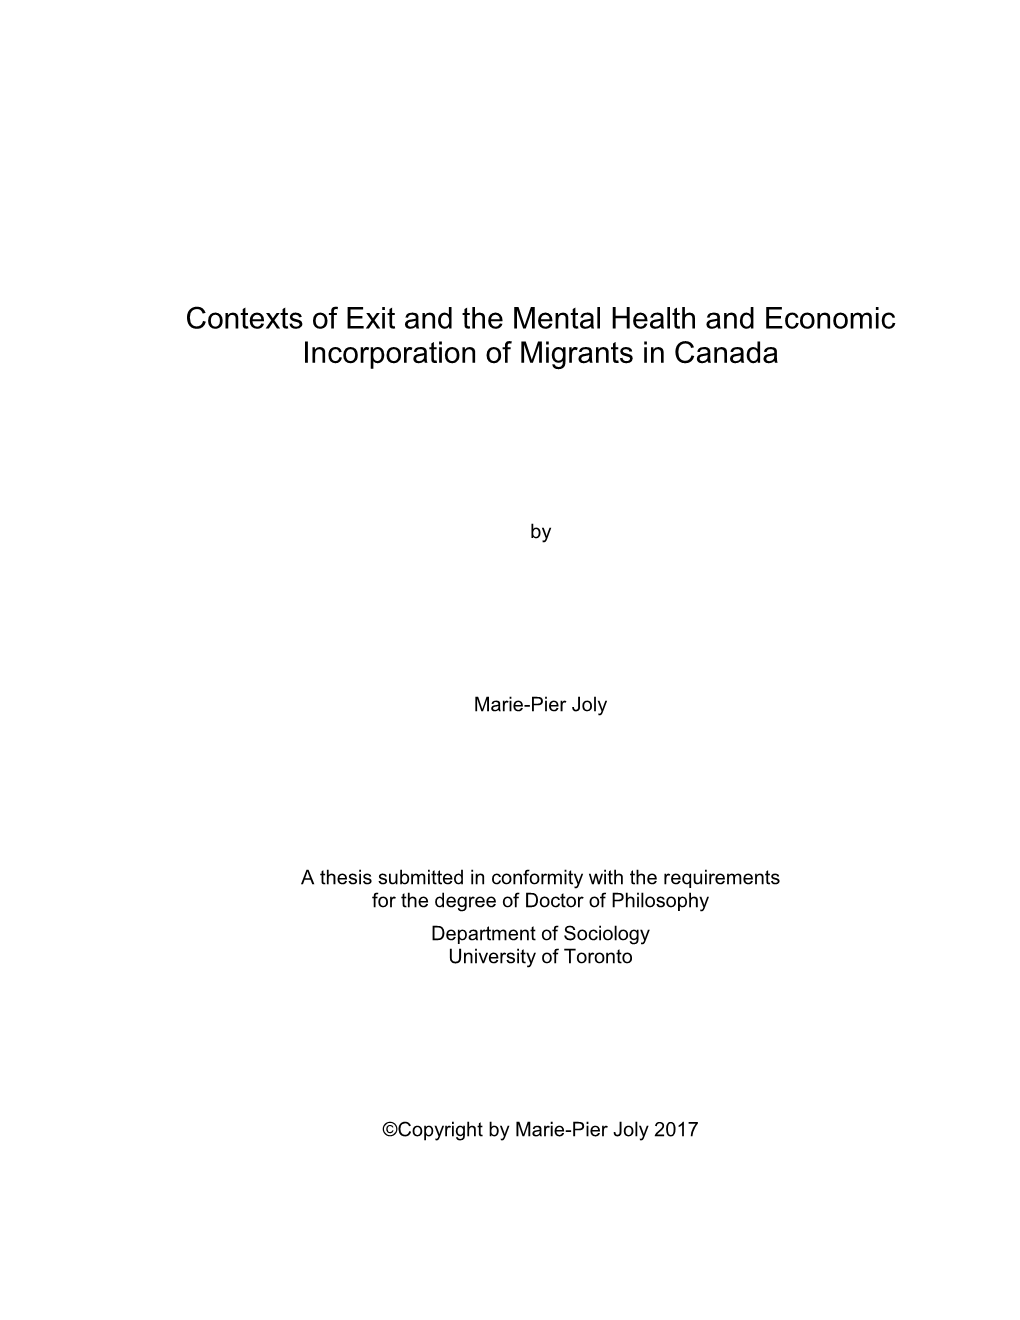 Contexts of Exit and the Mental Health and Economic Incorporation of Migrants in Canada